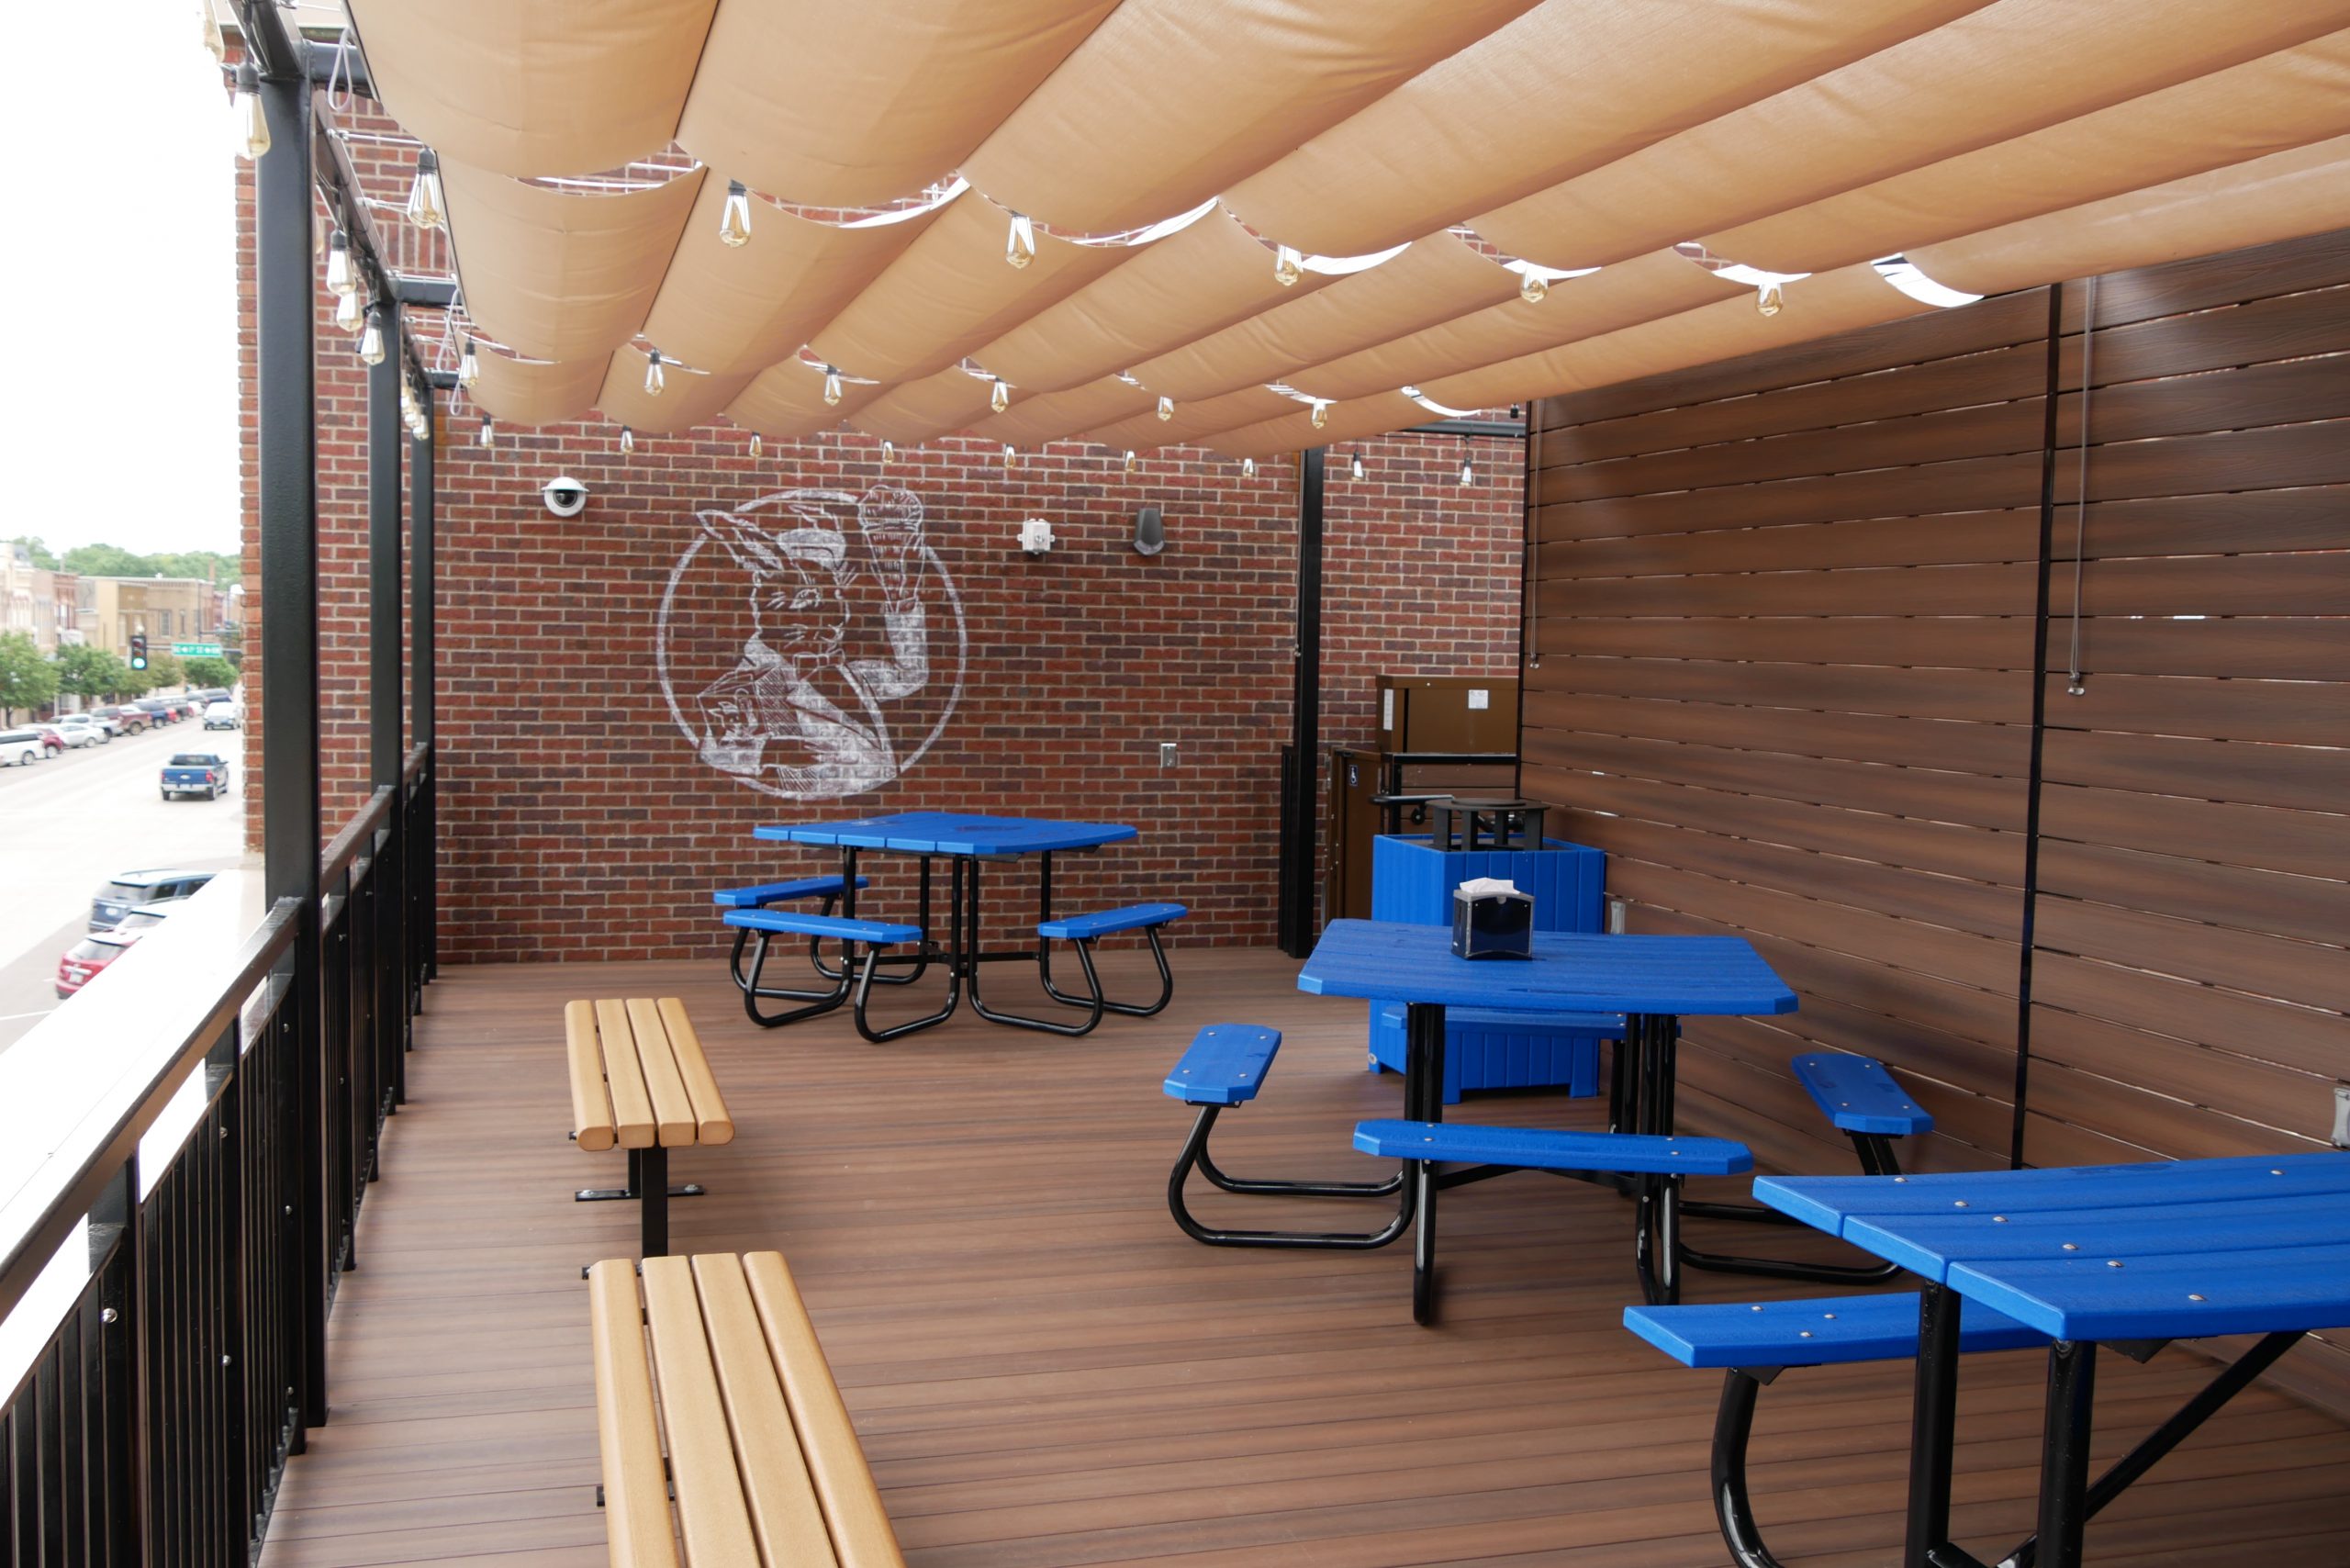 Outdoor balcony area with picnic table guest seating and Blue Bunny logo on brick wall